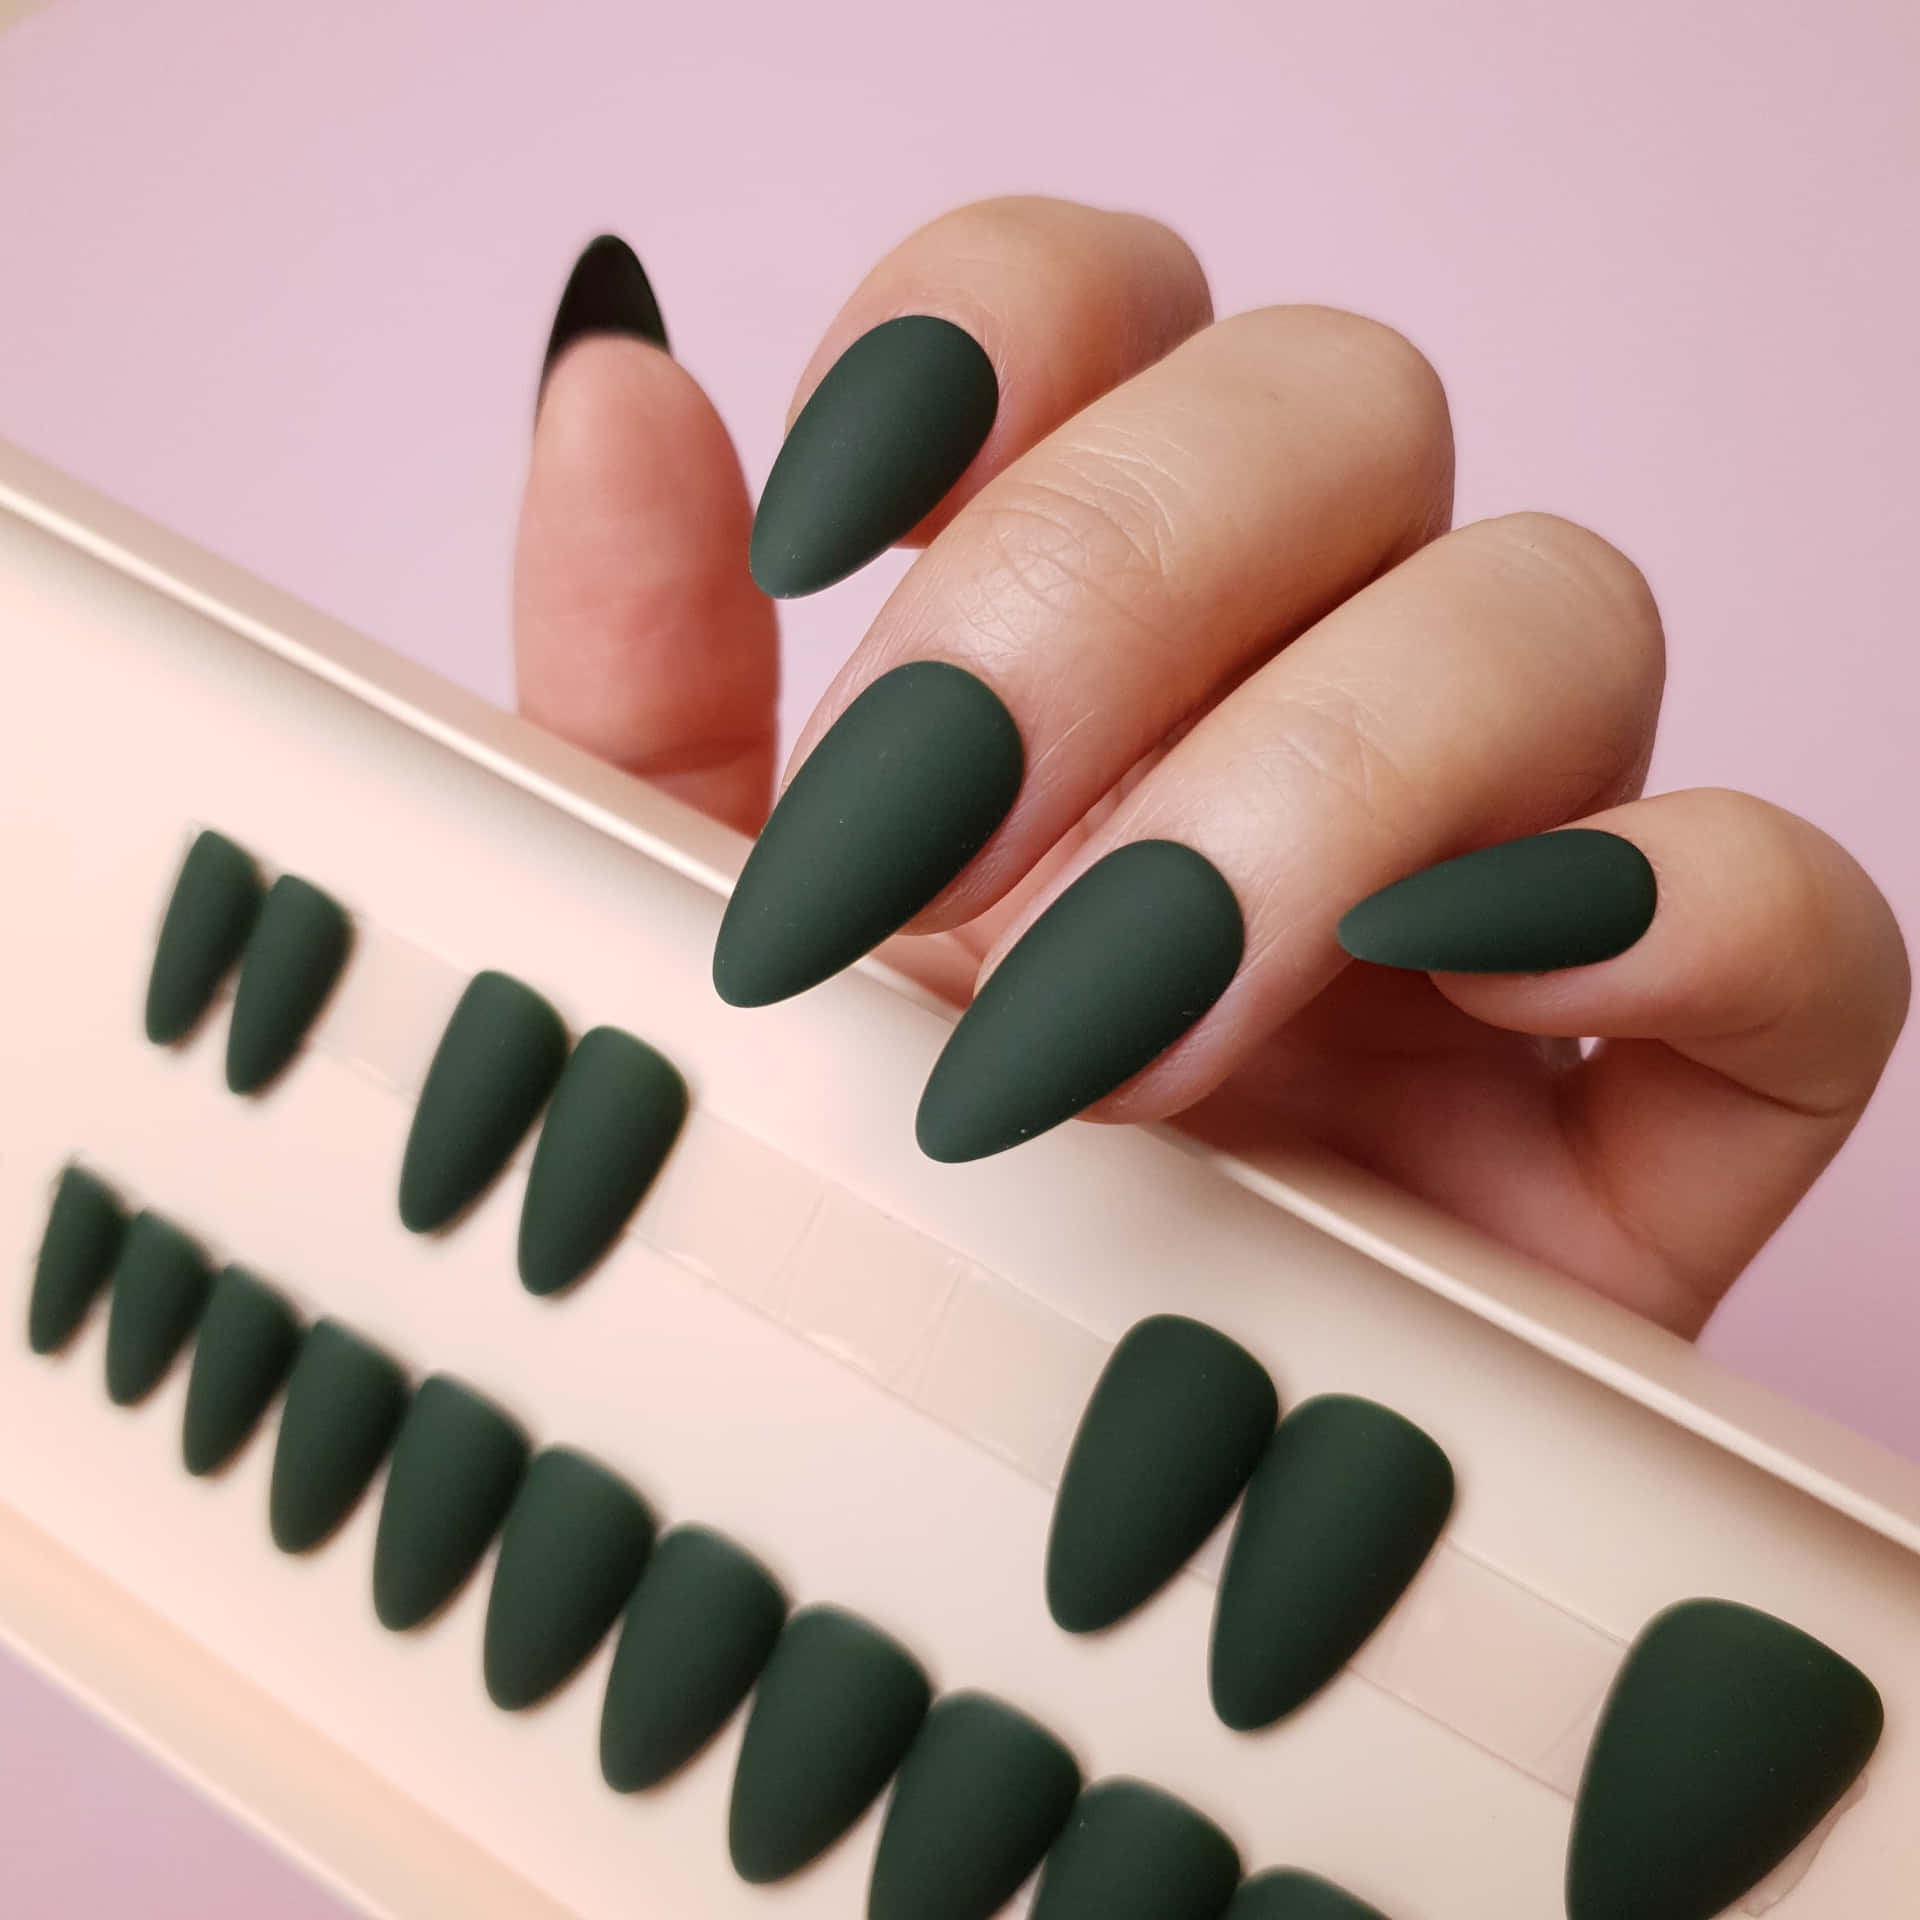 A Woman Holding A Box Of Green Nails